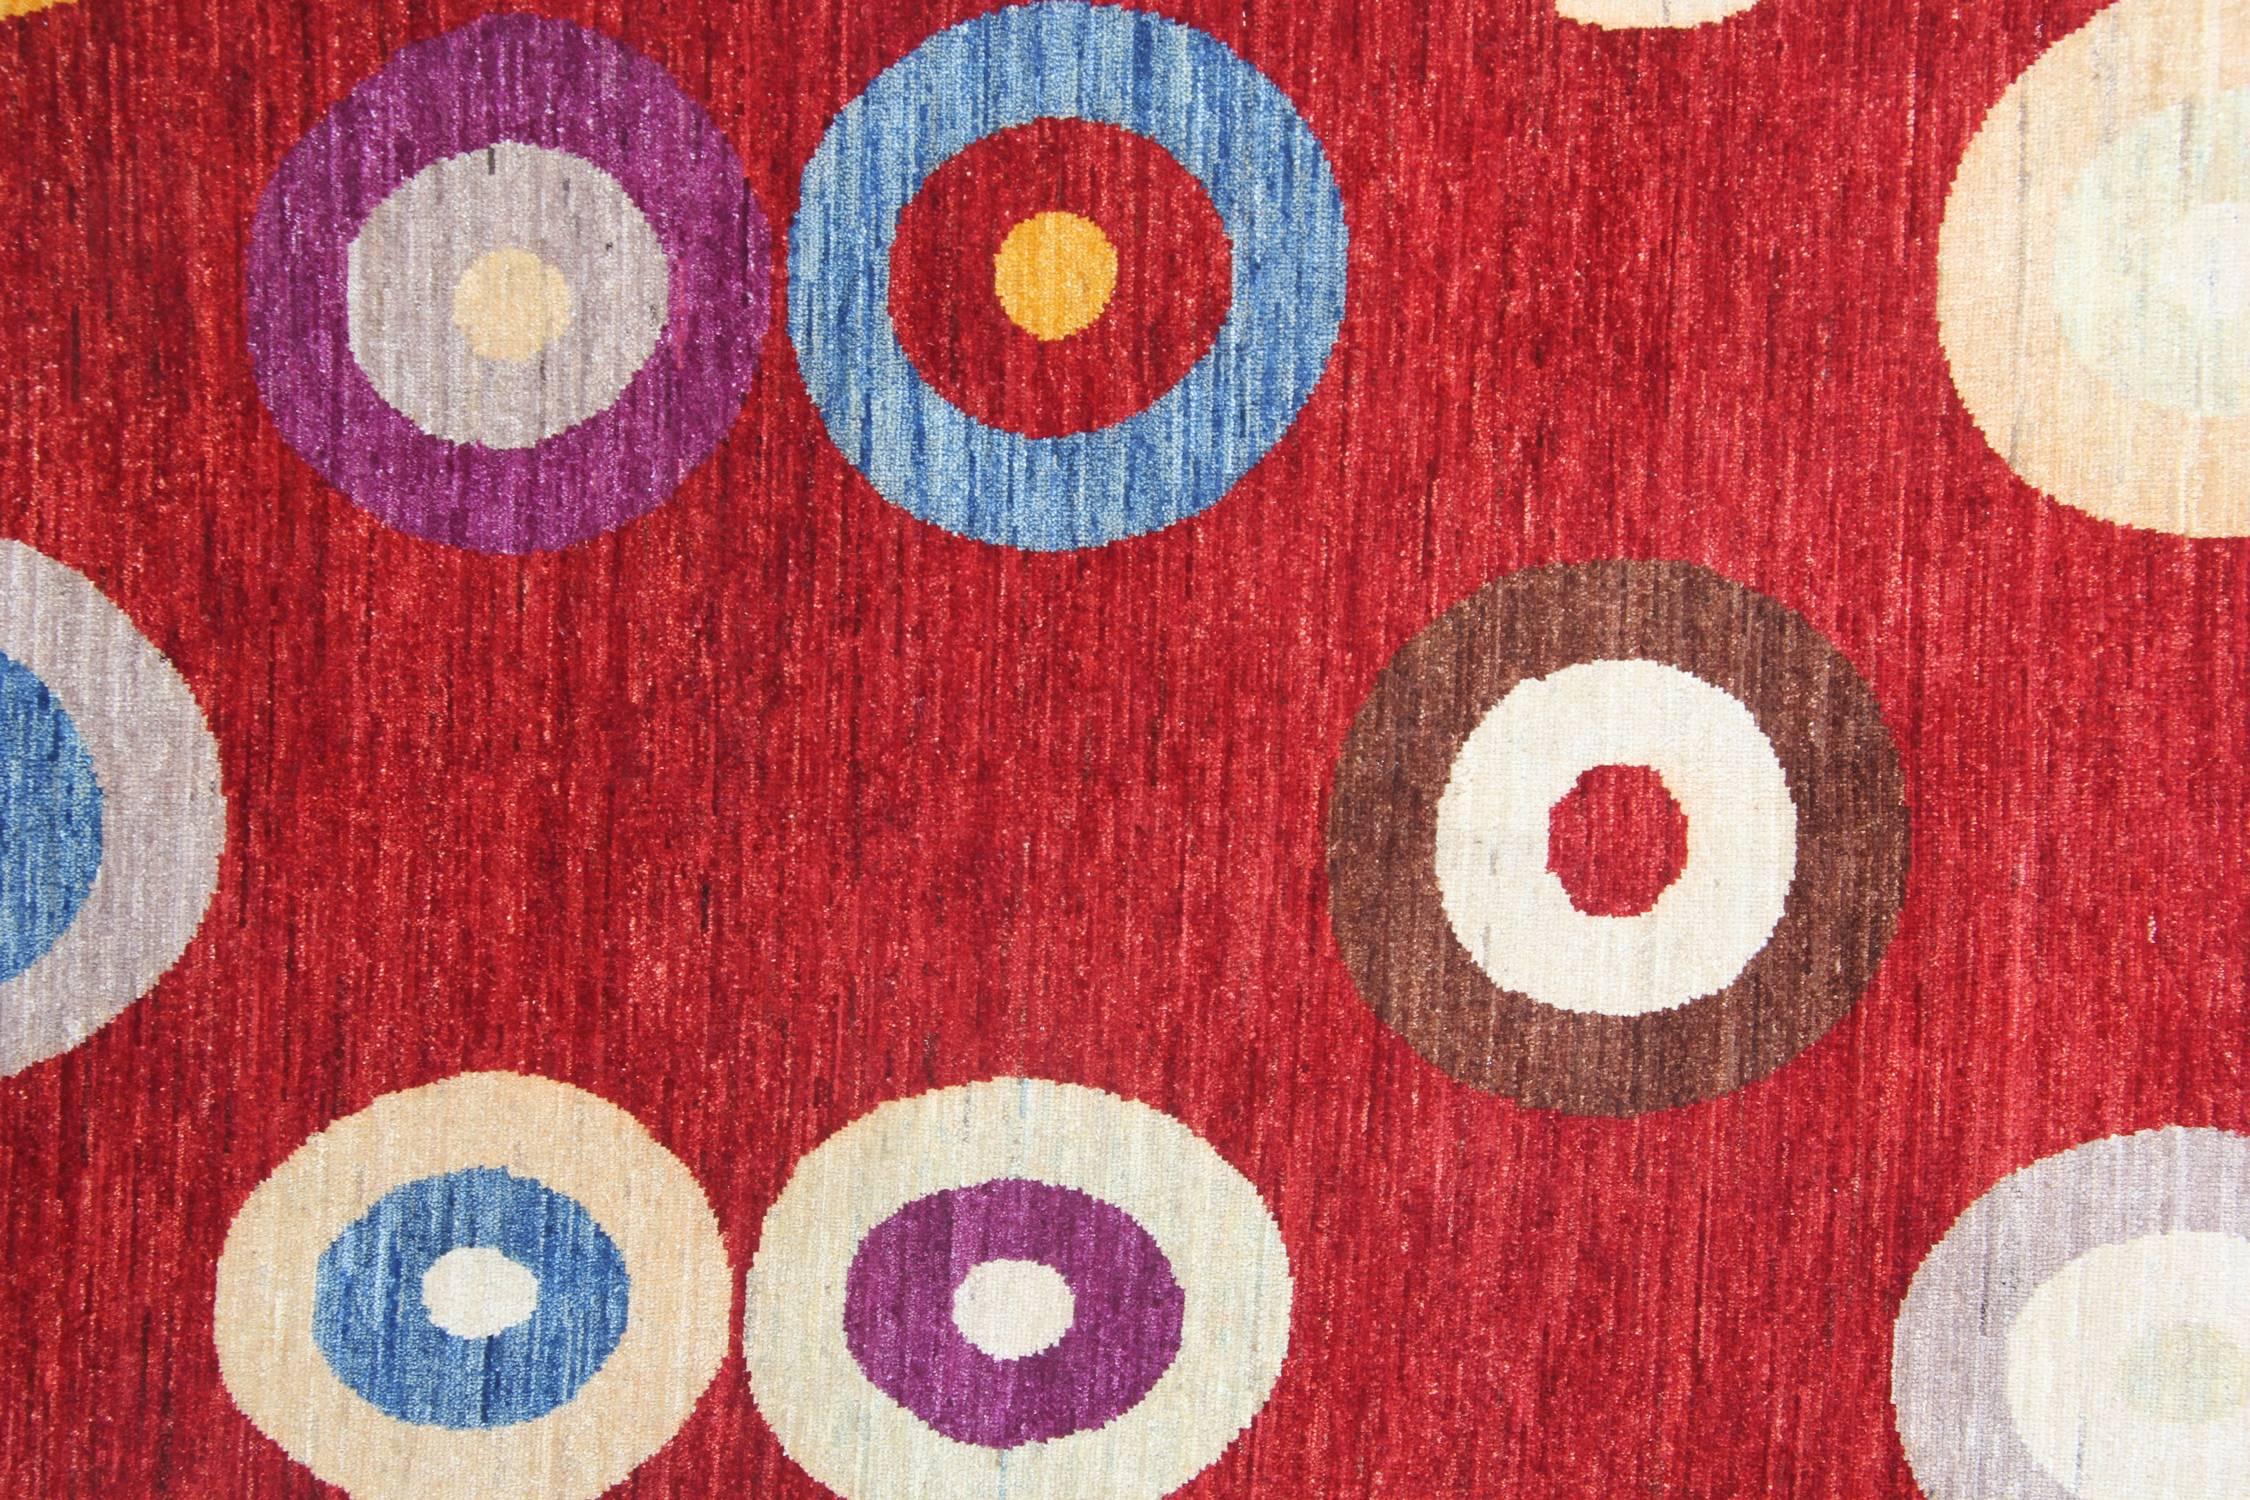 With rich colors and abstract elements, these handmade rugs give a subtle contemporary appearance. The red rug has a beautiful palette of blue, brown, ivory, gold and grey rug colors. These luxury rugs are grounded in stylish colors, which